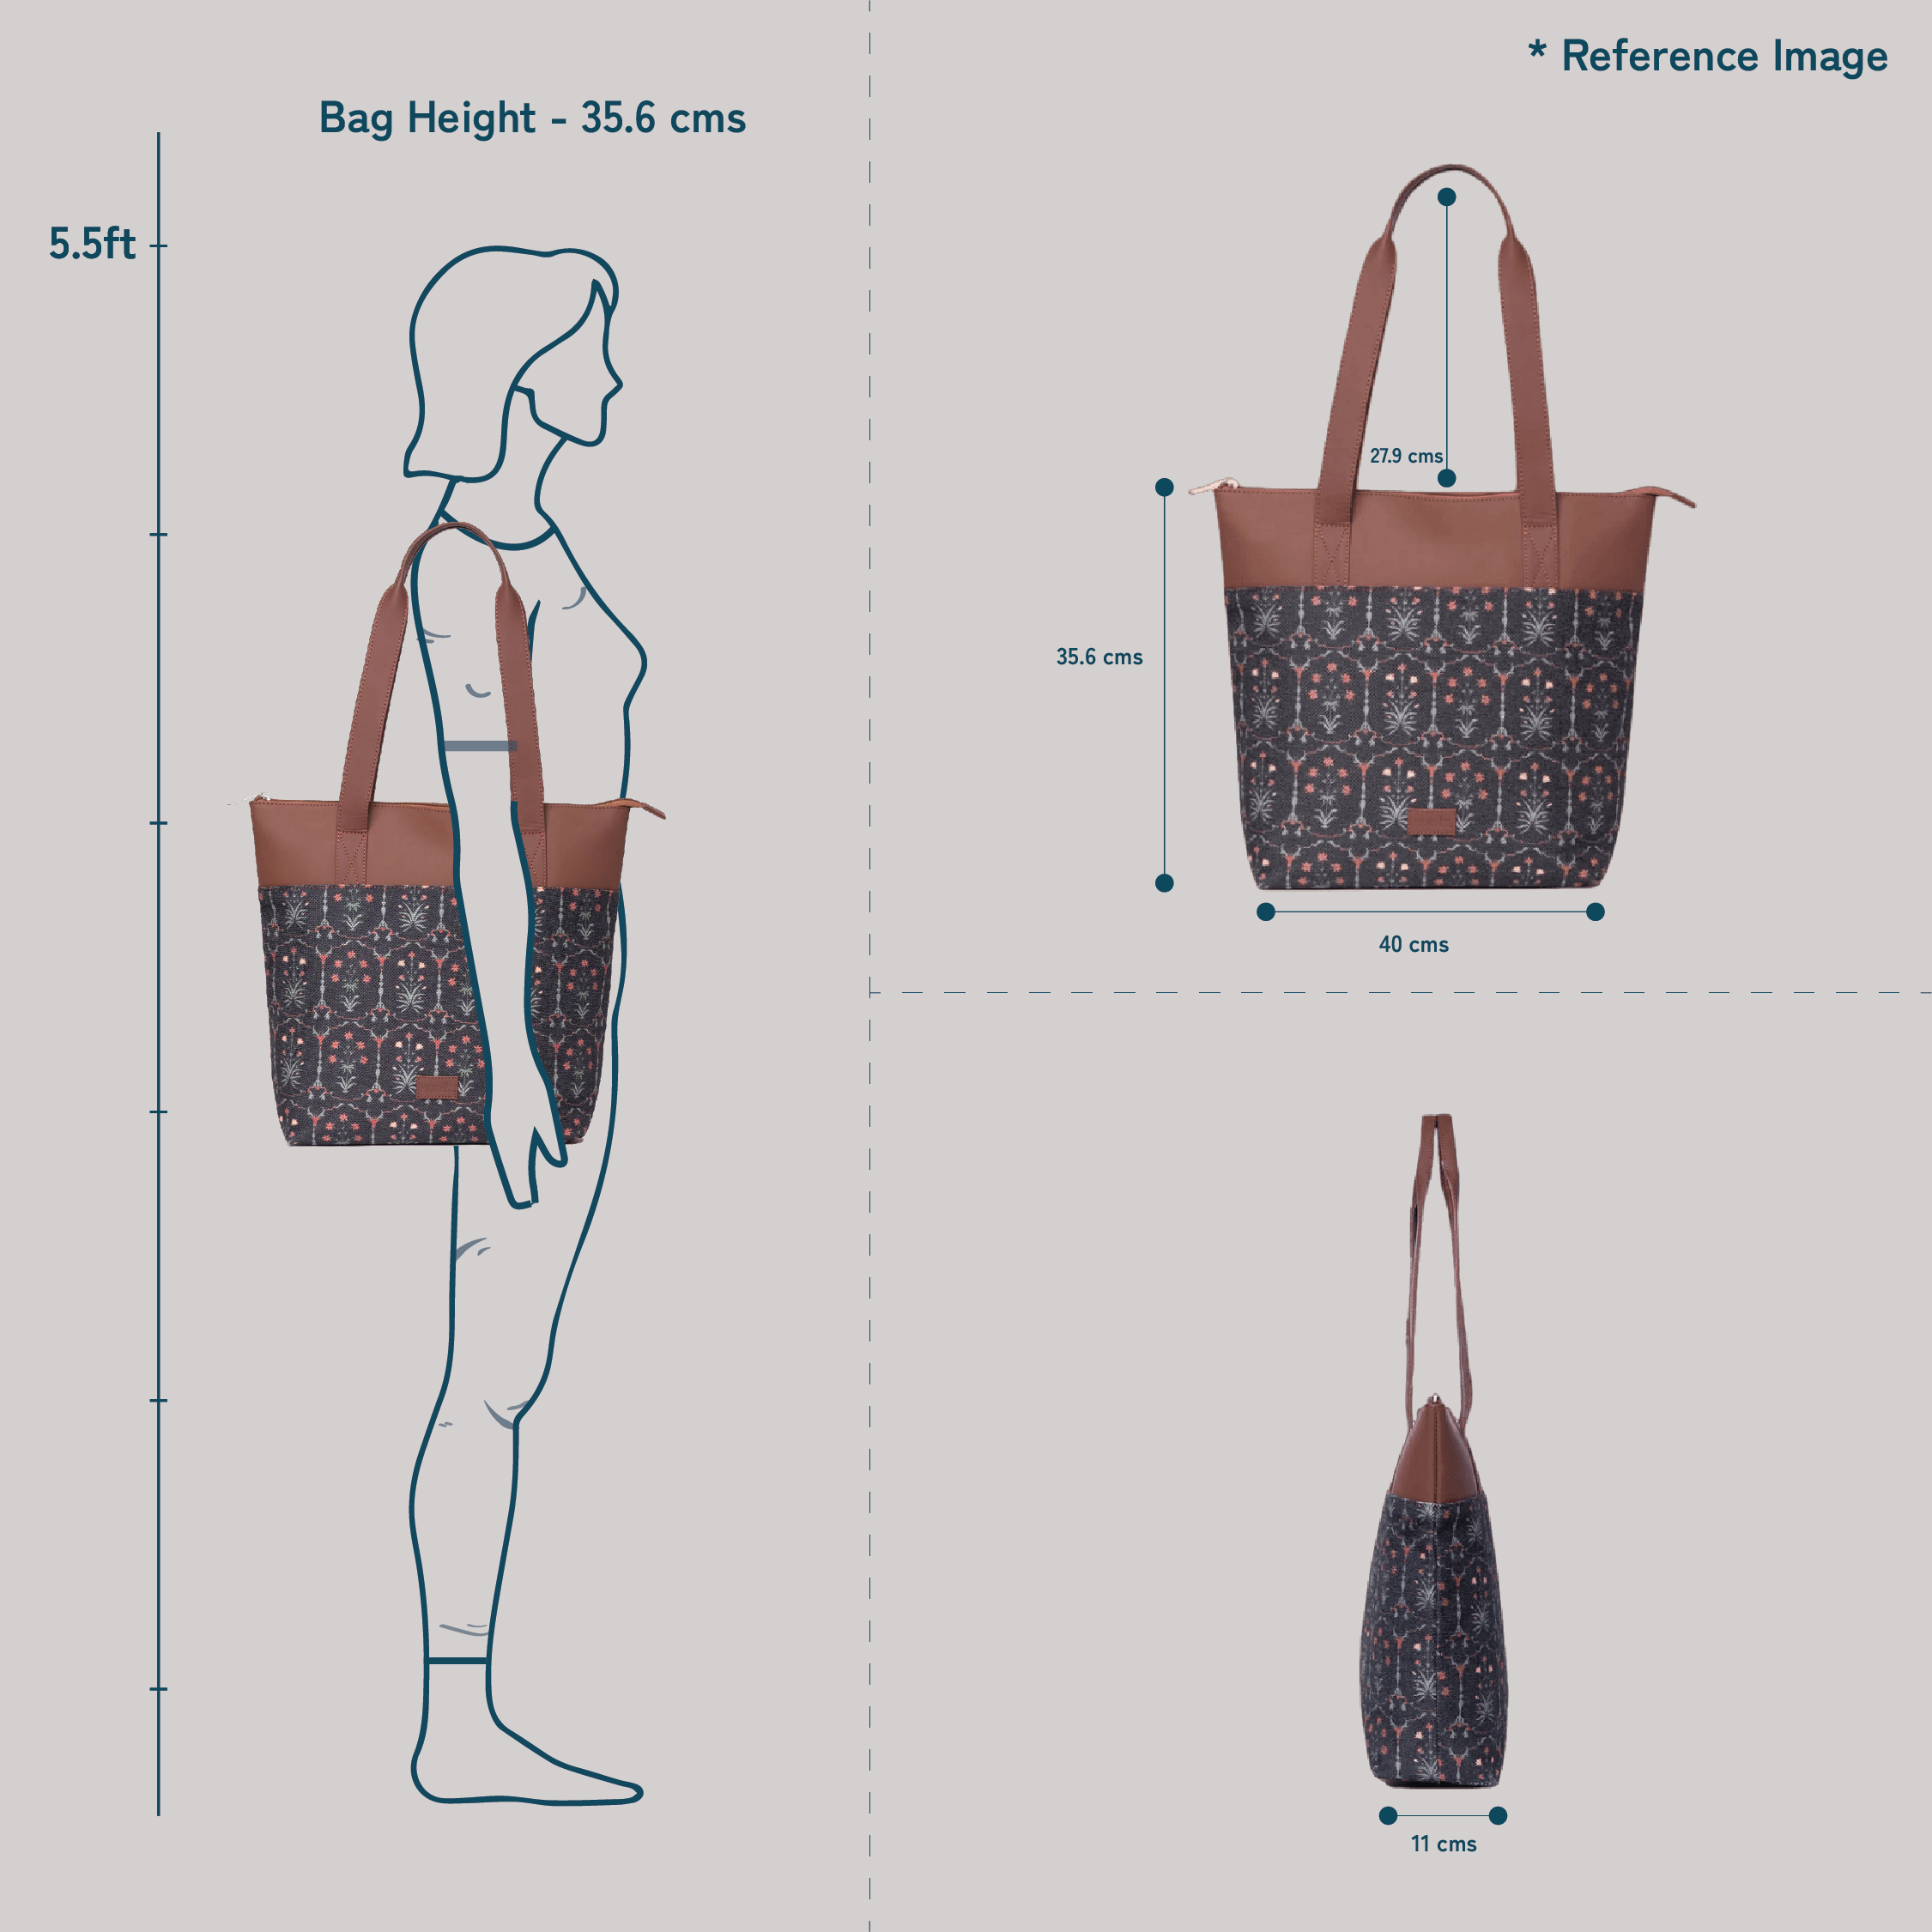 Aravalli Abstract Everyday Tote Bag